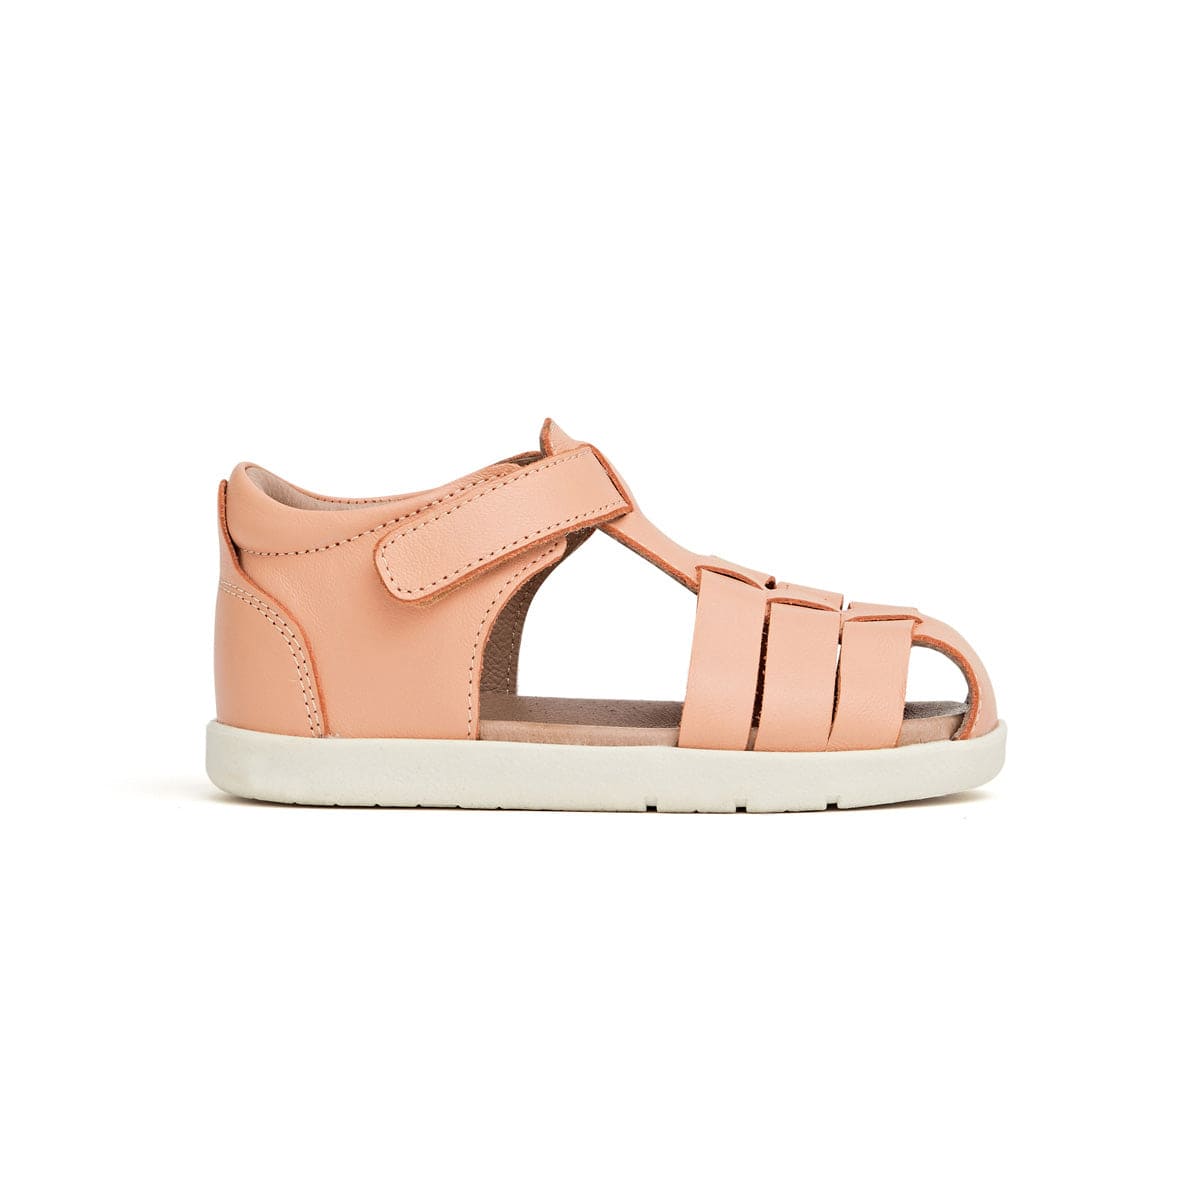 Pretty Brave Girls Shoes Billie Sandal in Coral